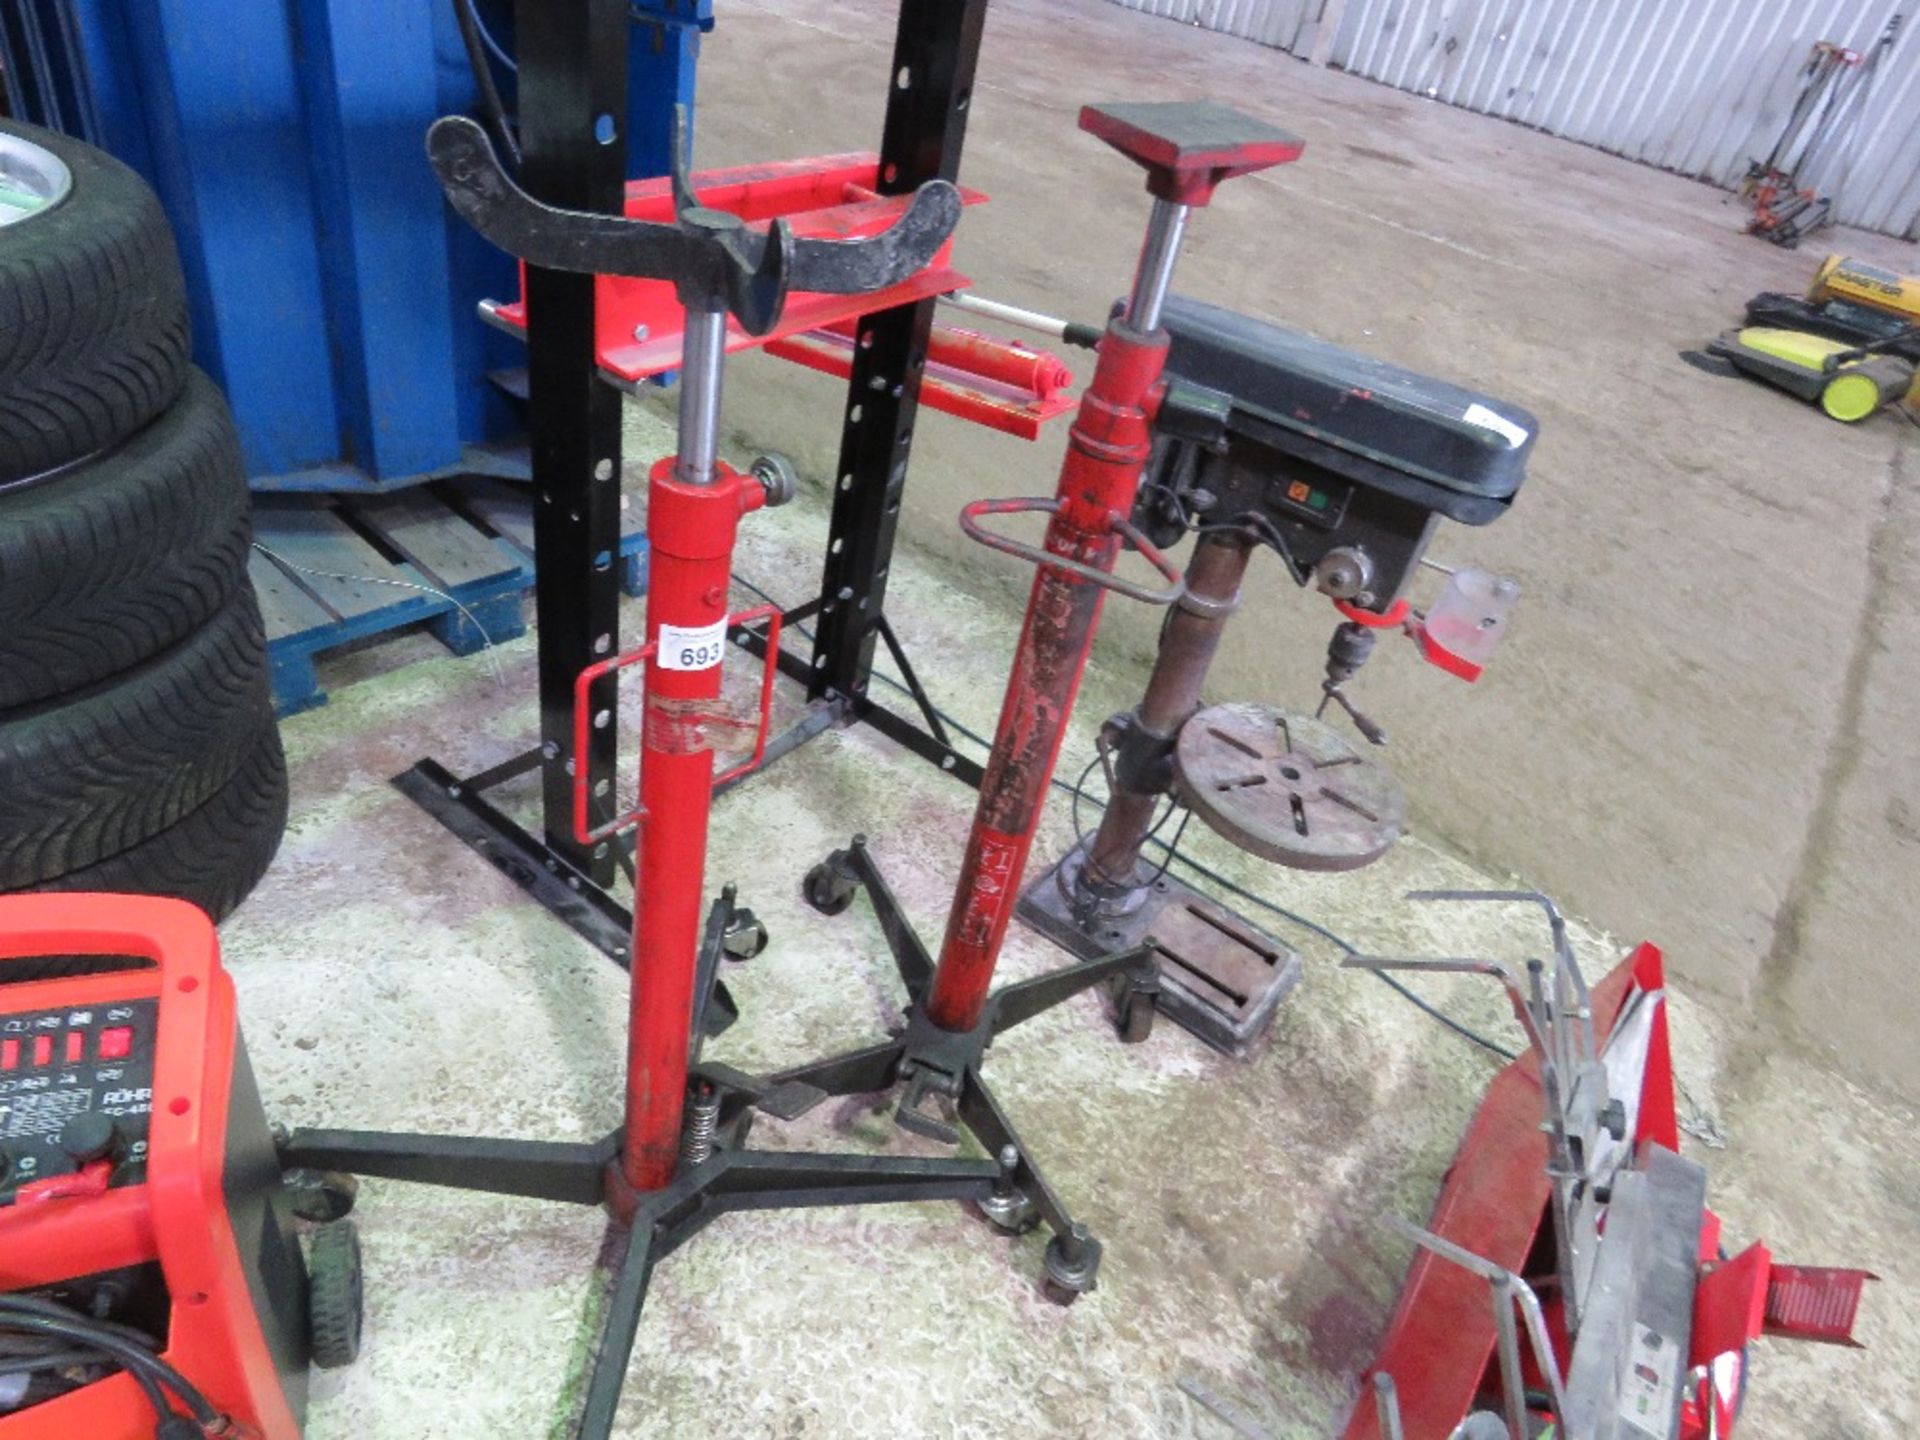 2 X HYDRAULIC FOOT OPERATED TRANSMISSION JACKS. SOURCED FROM GARAGE COMPANY LIQUIDATION.